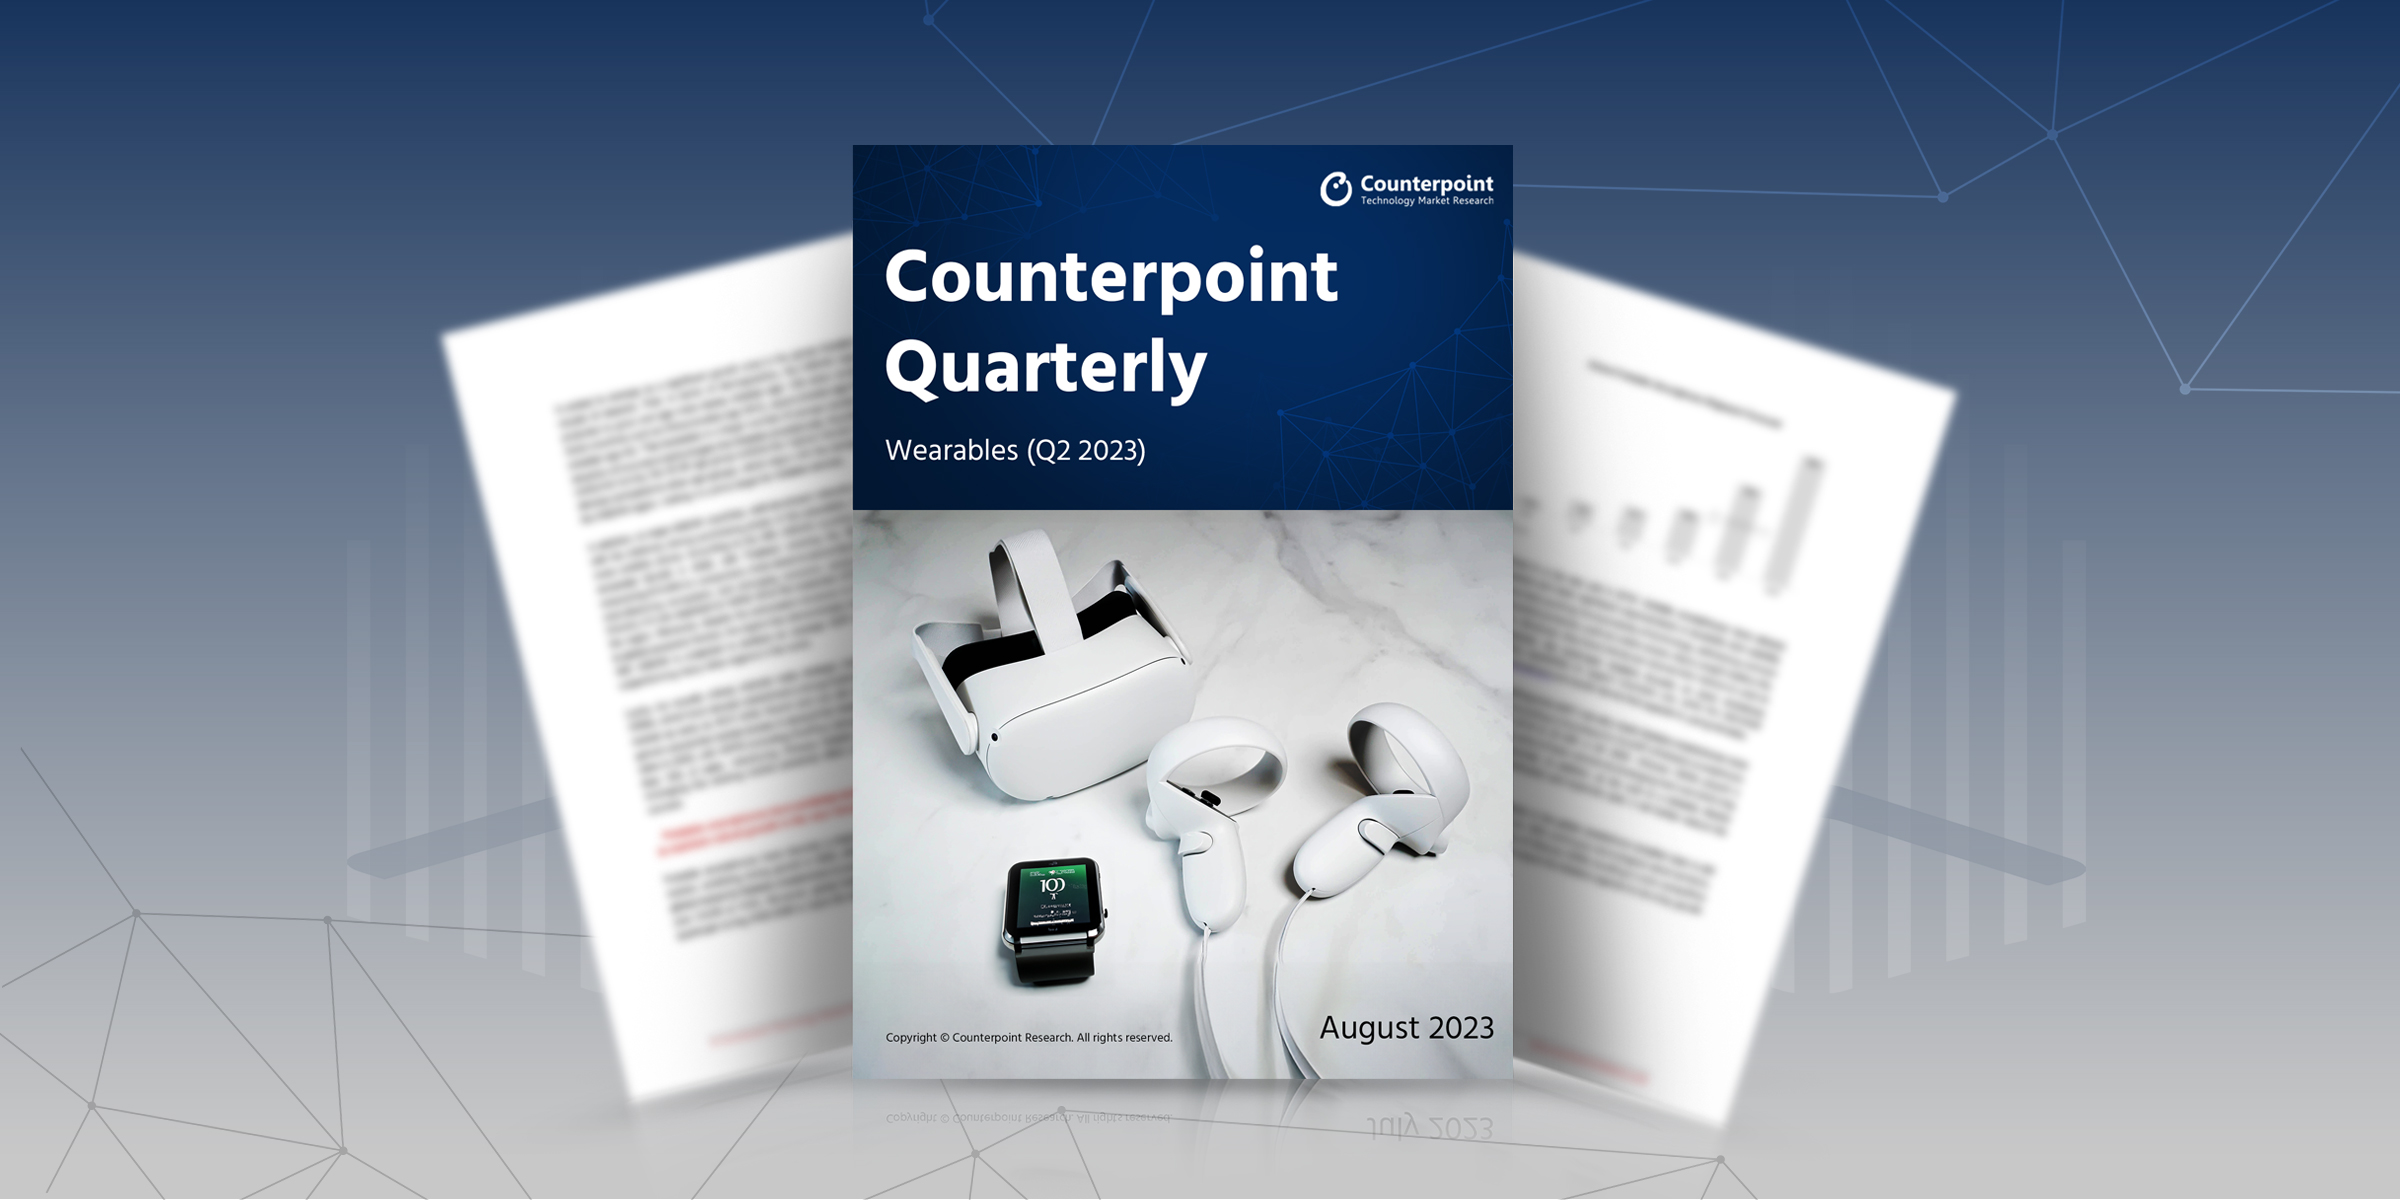 Counterpoint Quarterly: Q2 2023